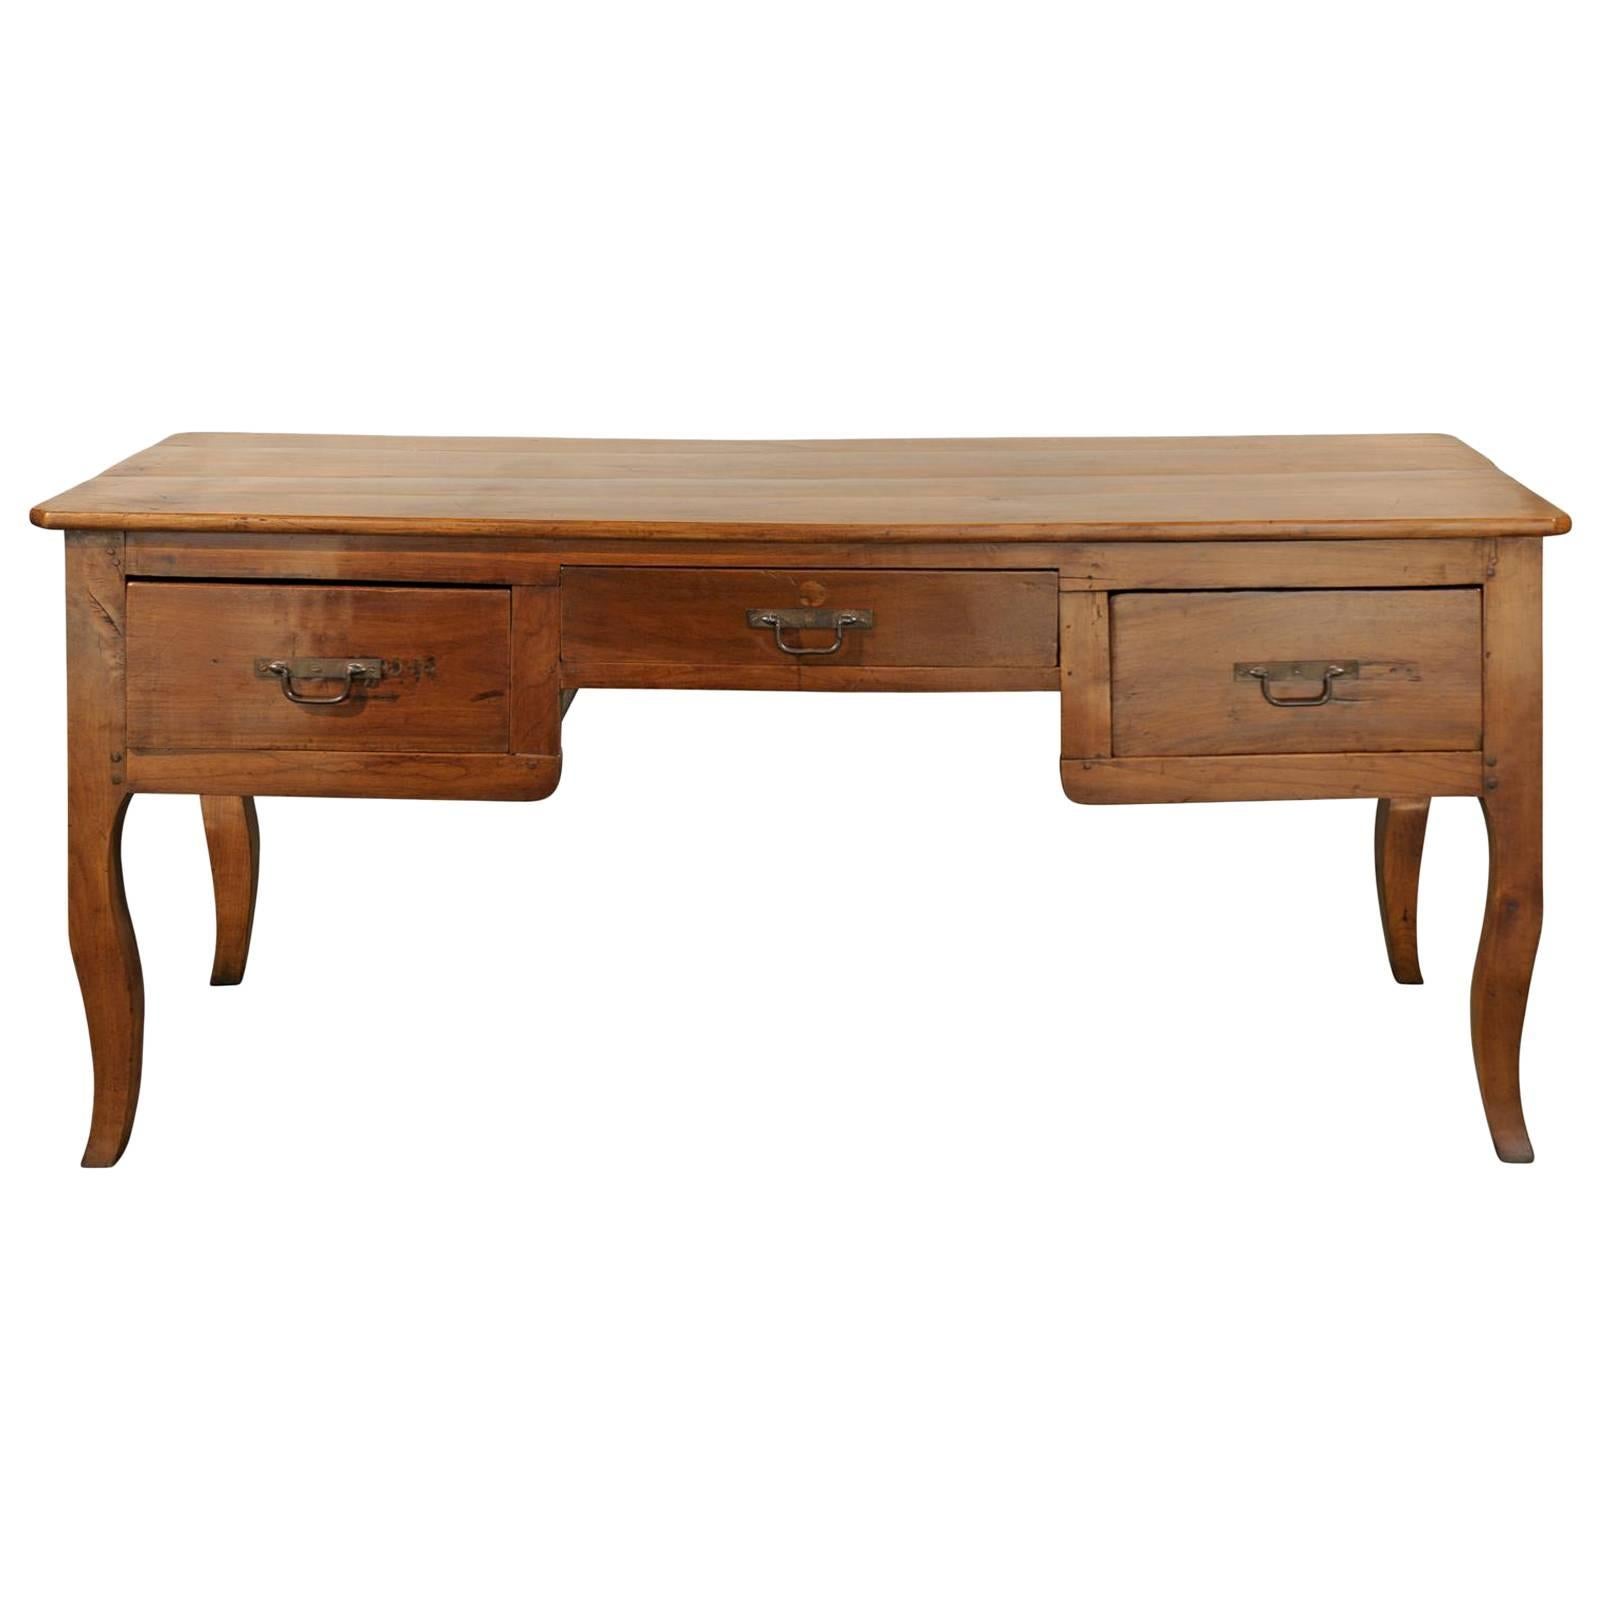 18th-19th Century French Provincial Fruitwood Desk